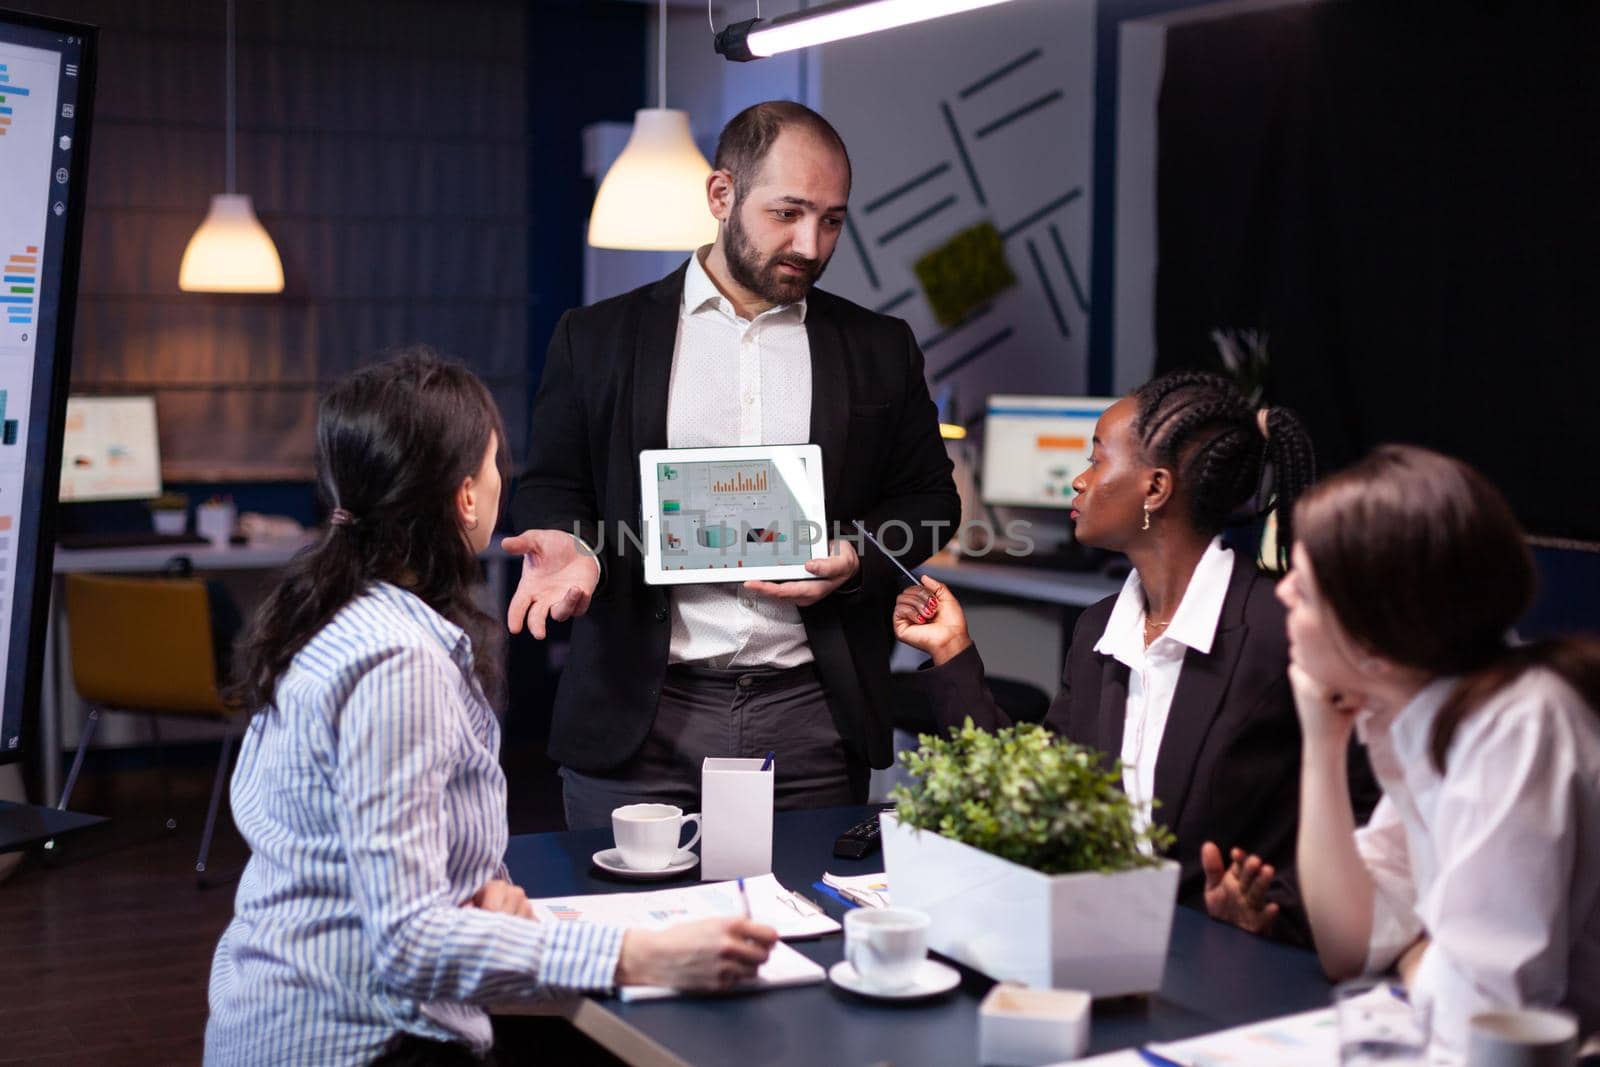 Overworked businessman showing financial graphs presentation using tablet by DCStudio